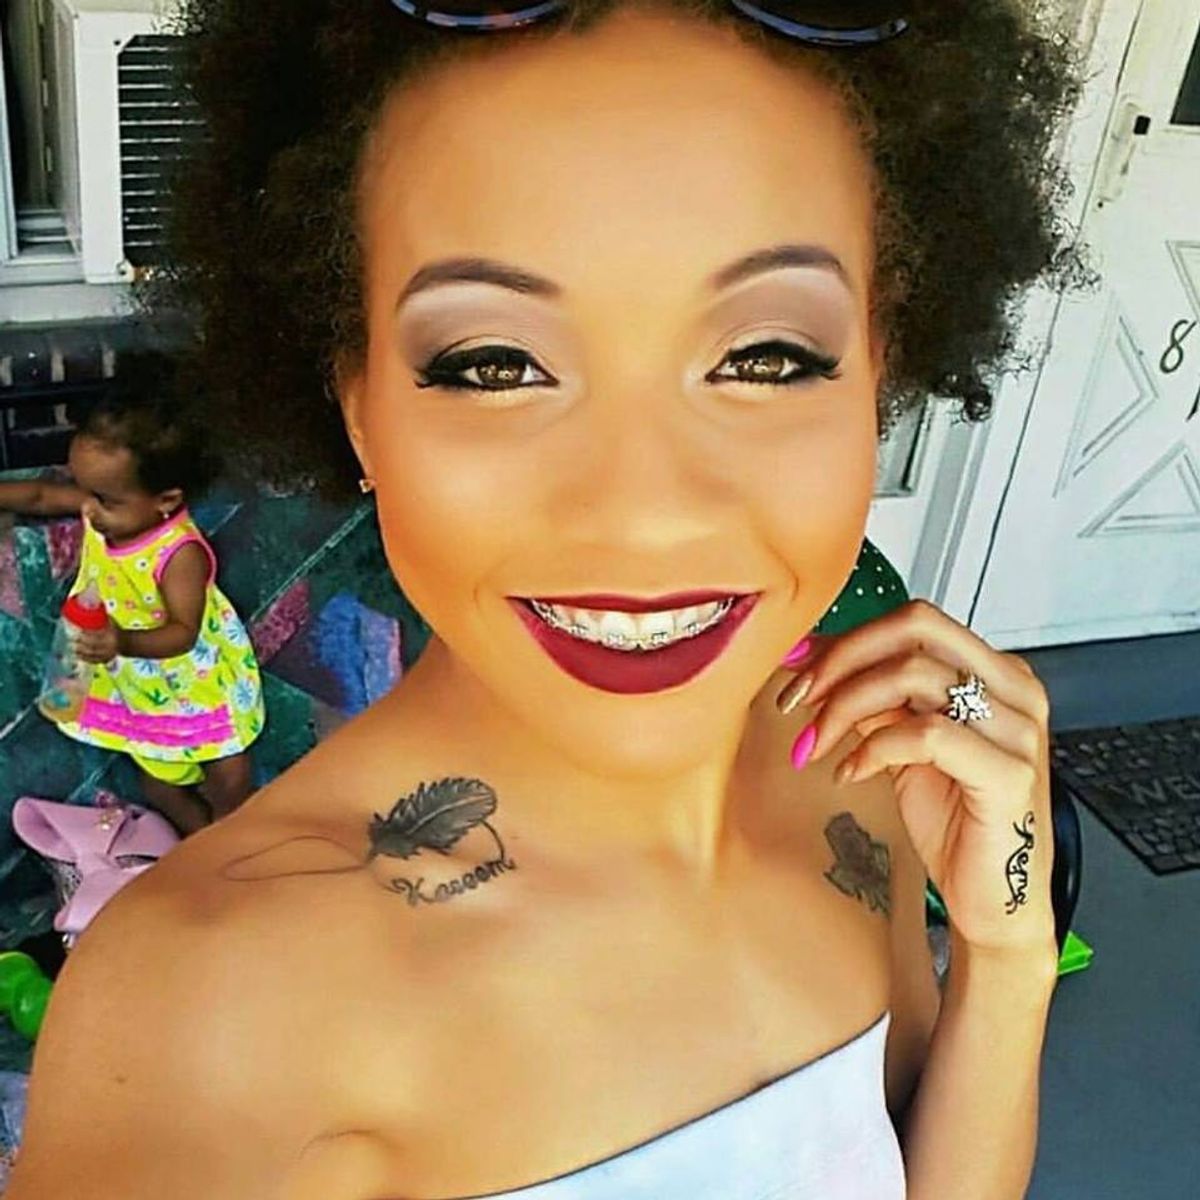 There Is No Justifying Korryn Gaines' Death. Period.